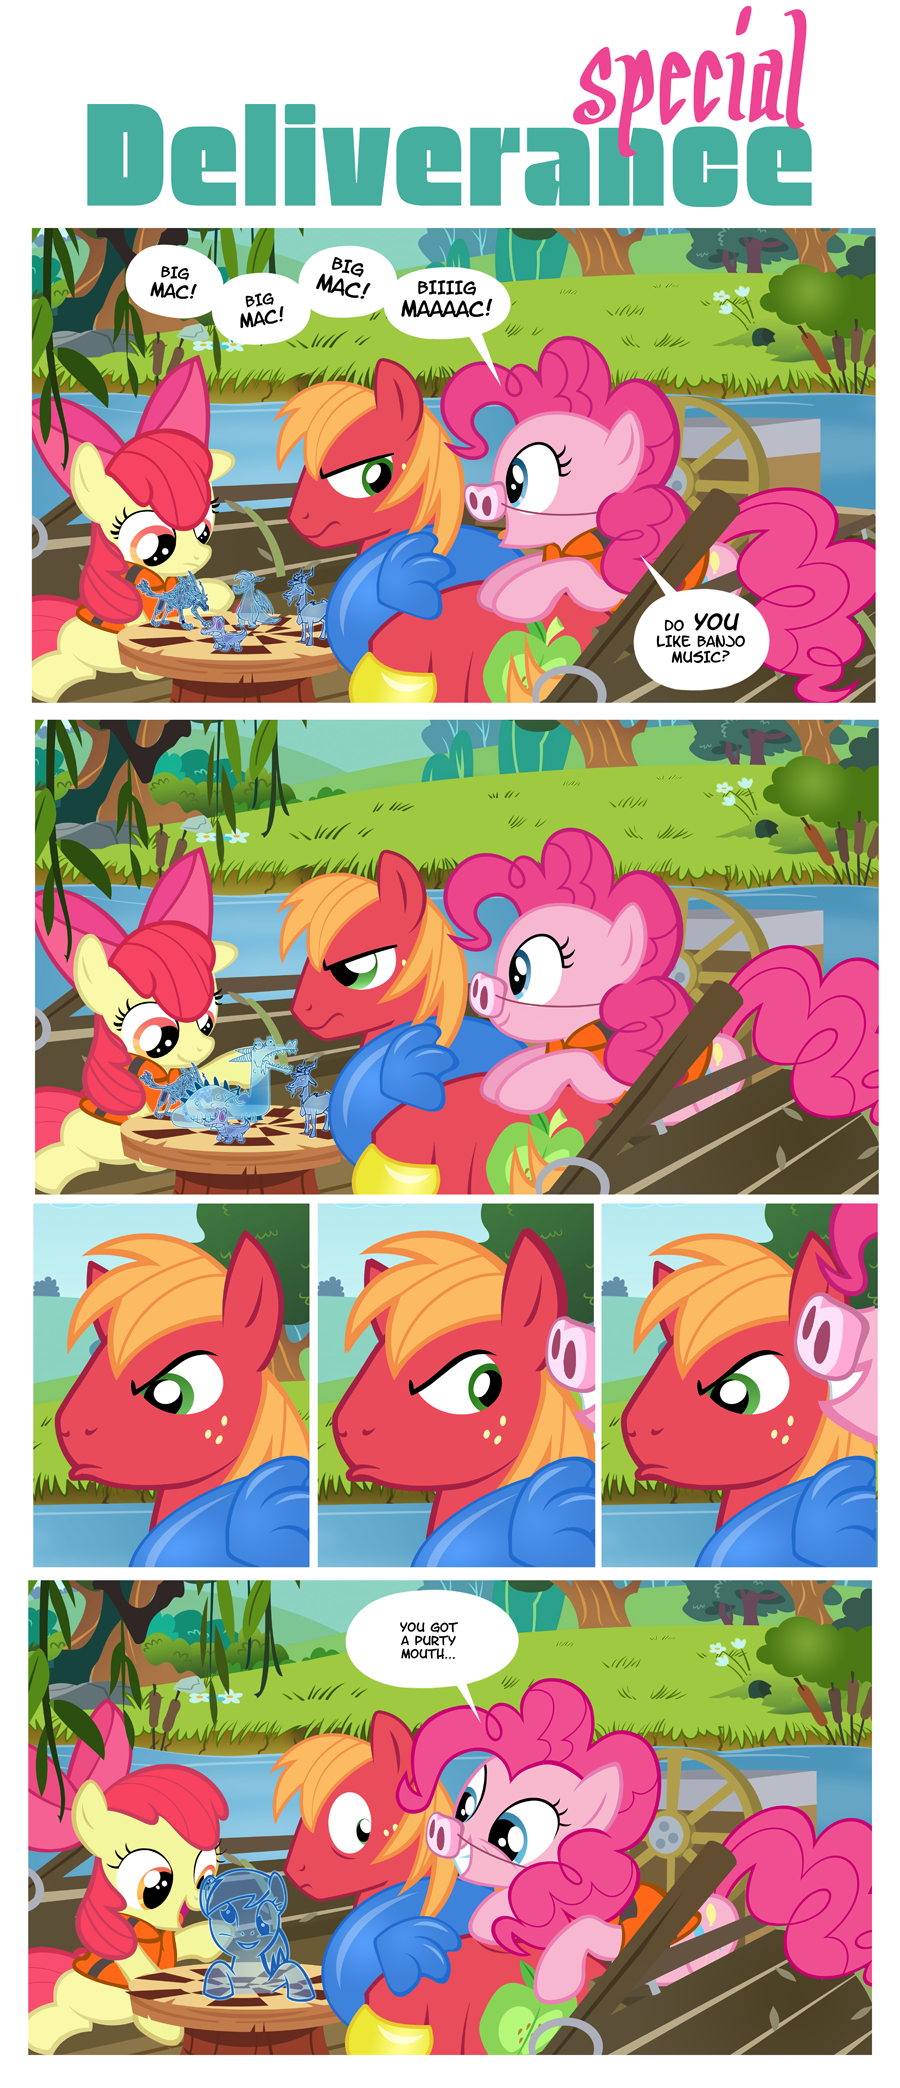 [Obrázek: special_deliverance_comic_by_pixelkitties-d71r8q3.png]